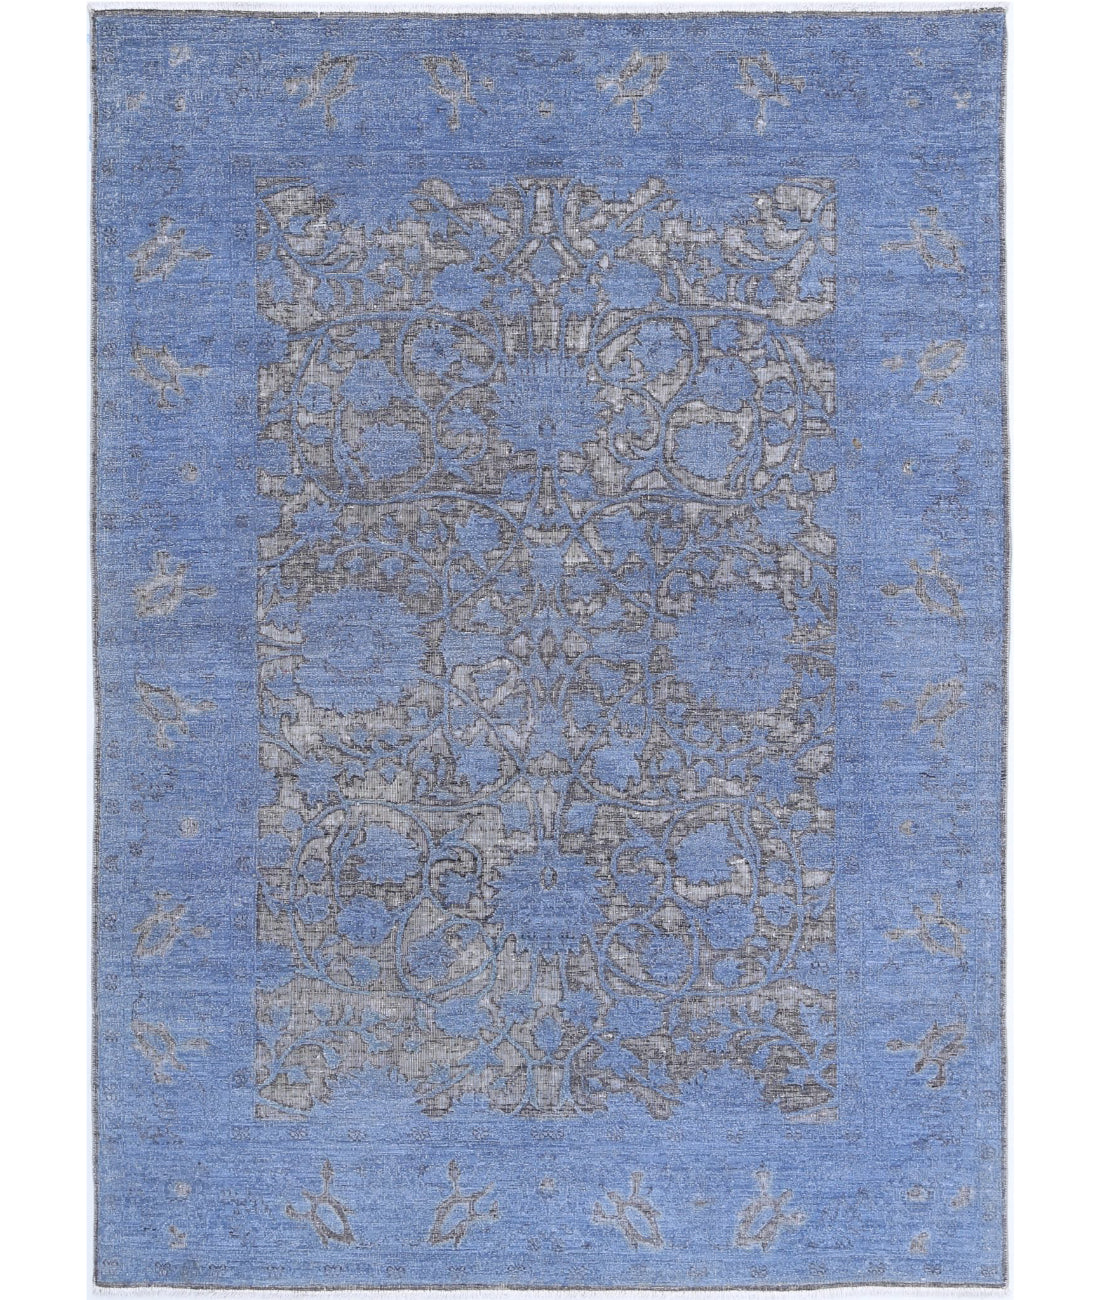 Hand Knotted Onyx Wool Rug - 4'10'' x 6'11'' 4'10'' x 6'11'' (145 X 208) / Blue / Blue